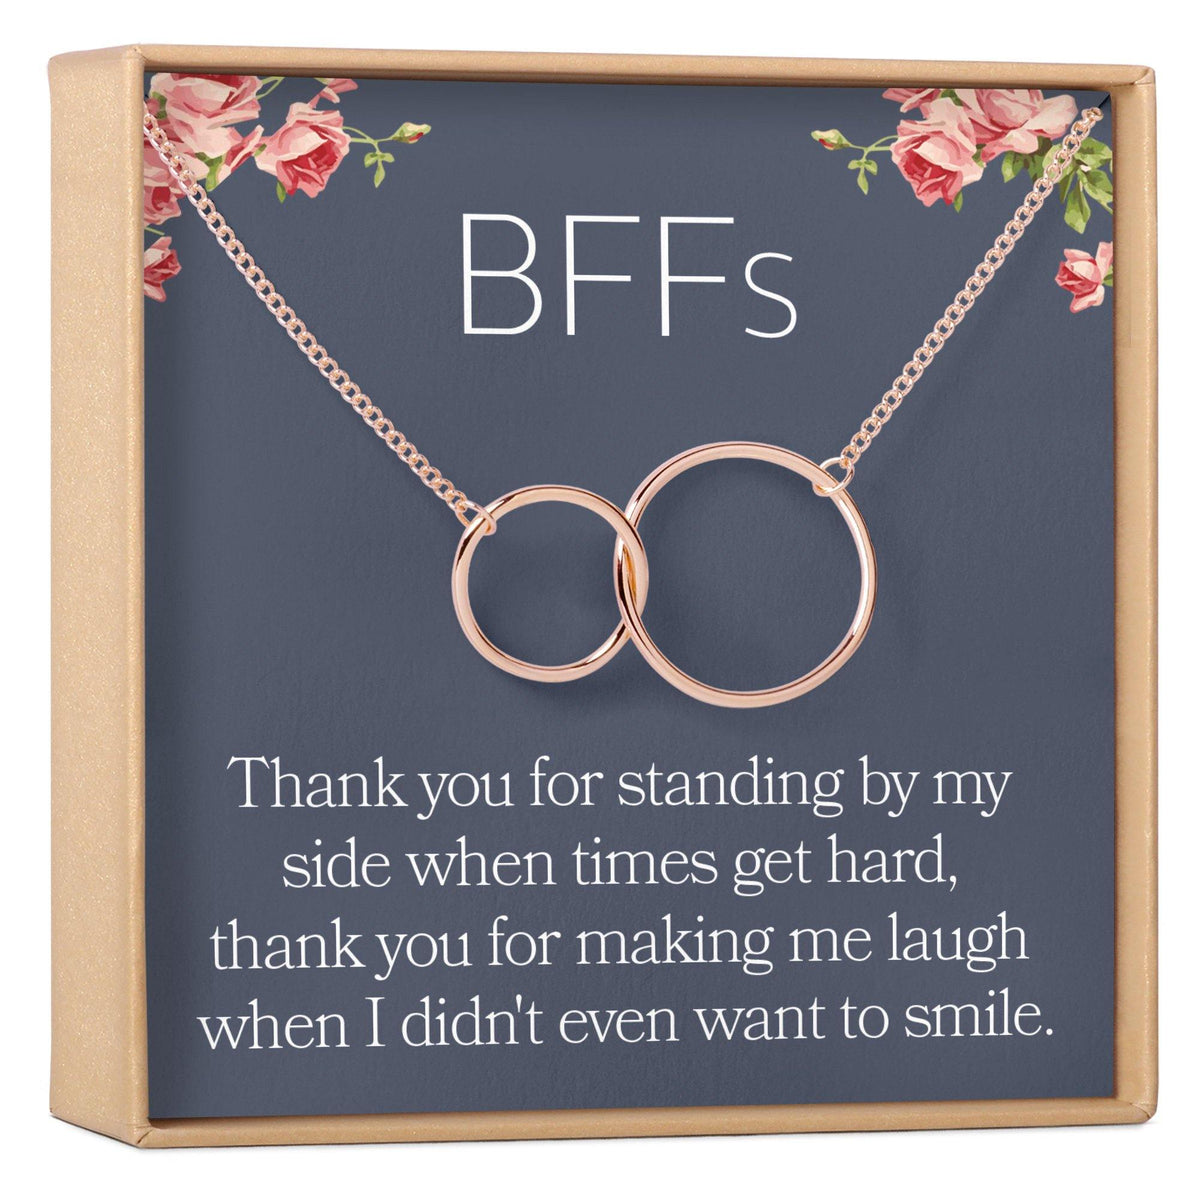 BFF Necklace - Dear Ava, Jewelry / Necklaces / Pendants